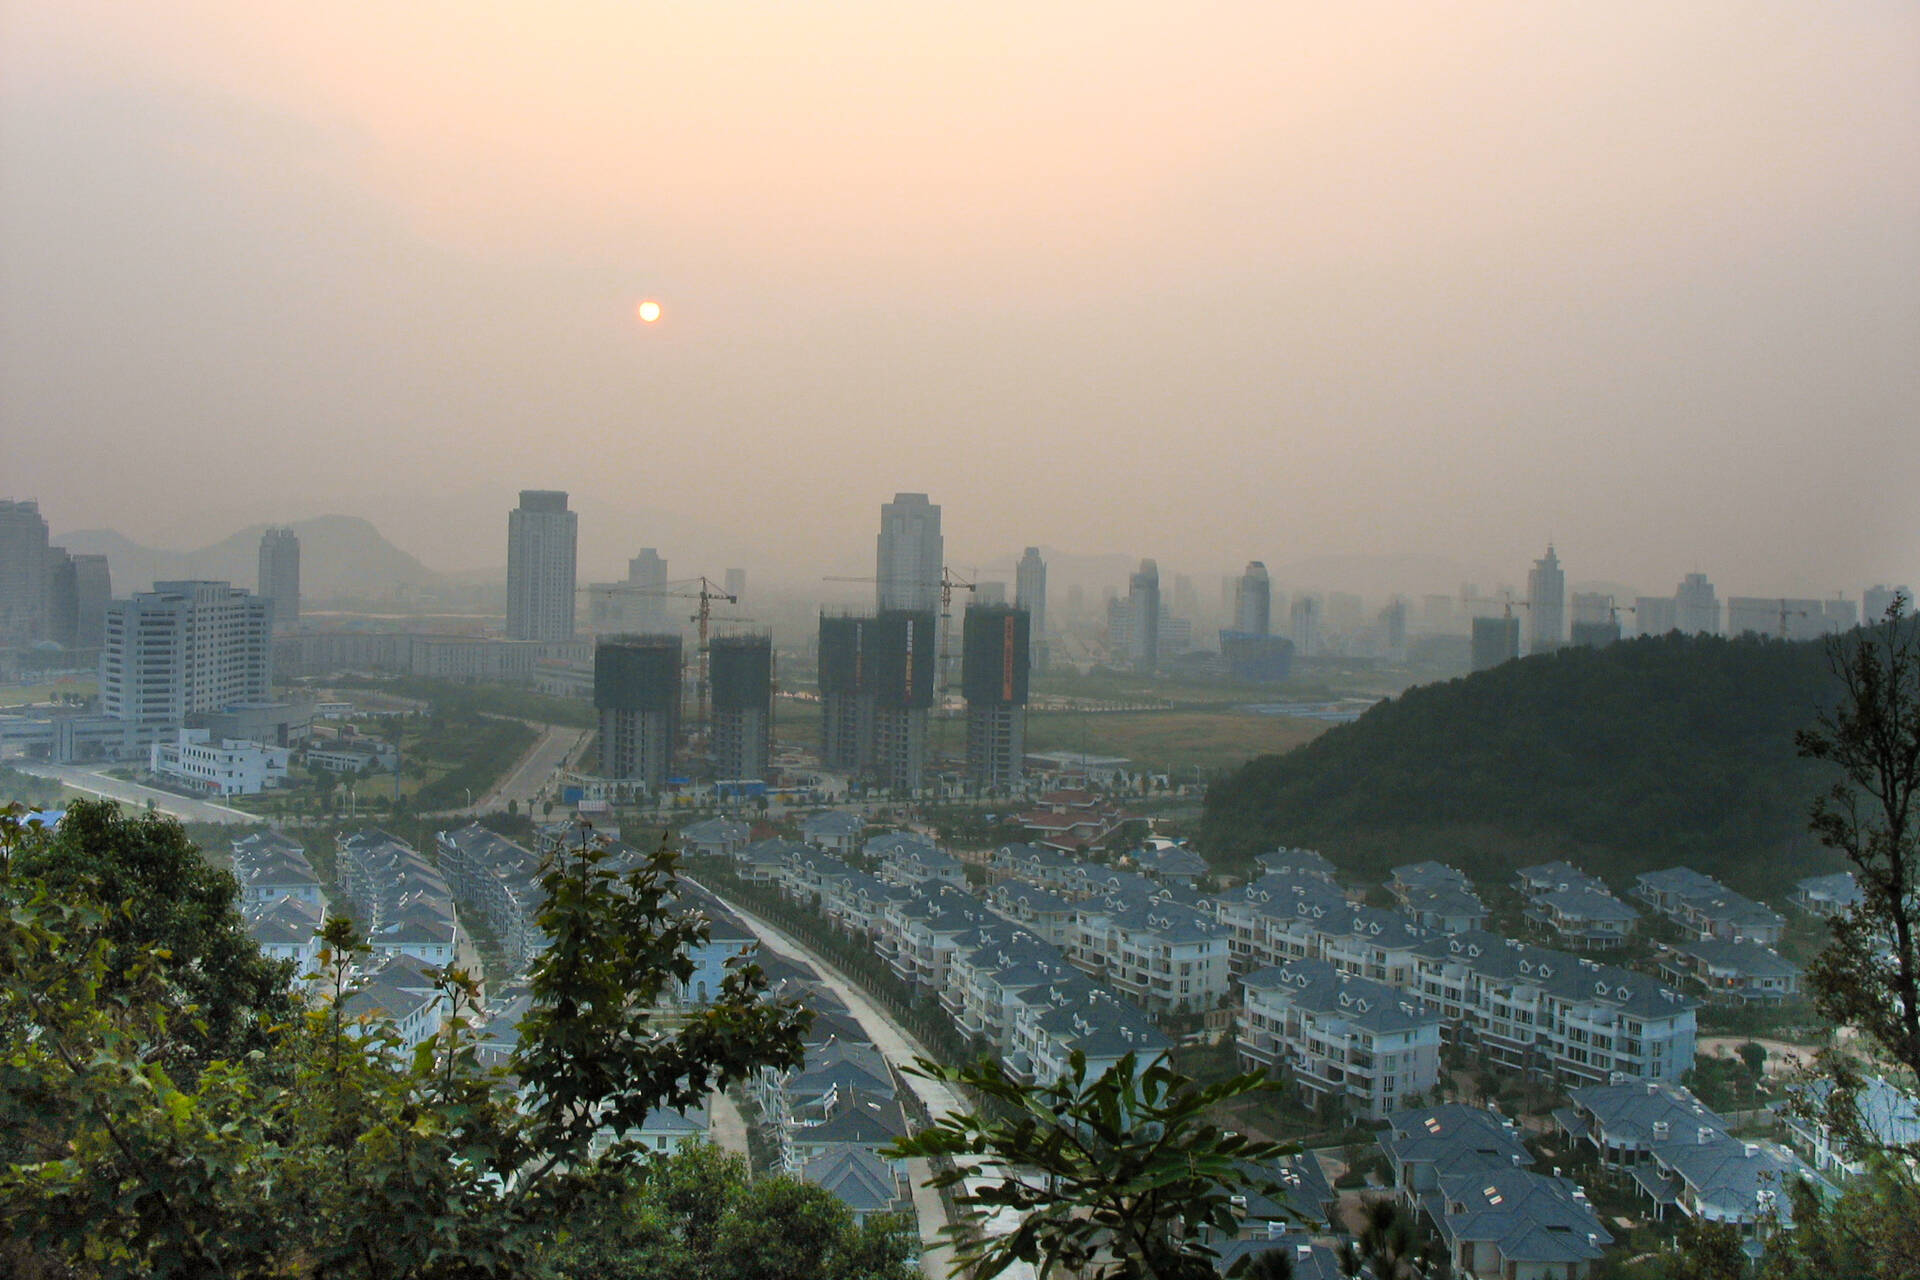 Biogas: smog in the city of Taizhou